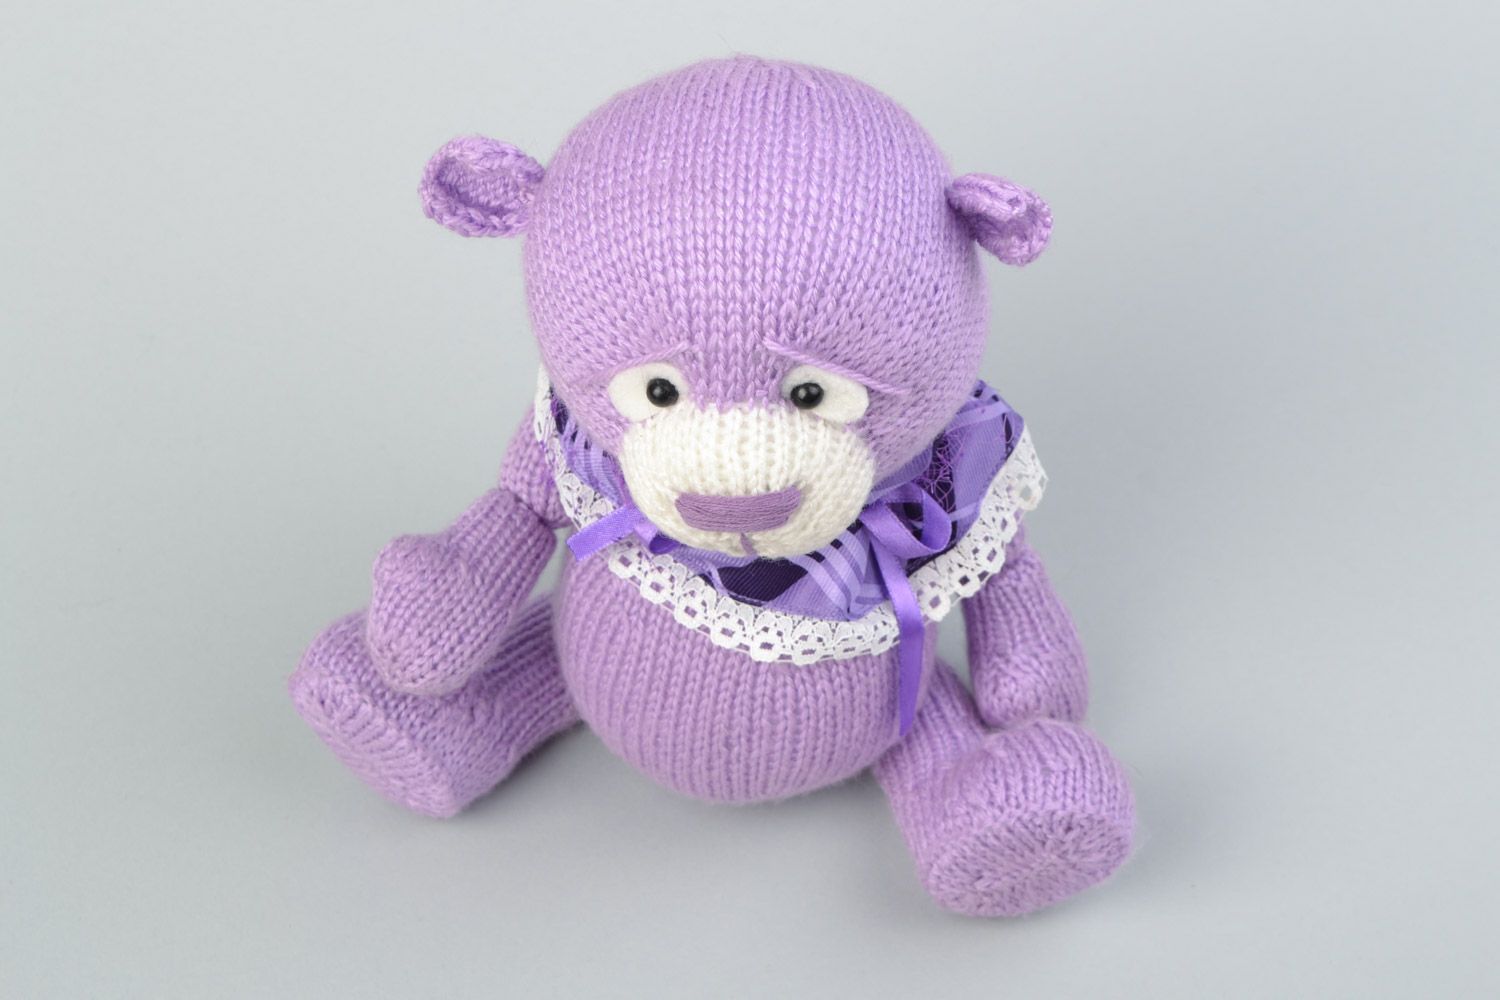 Handmade decorative crocheted purple bear toy with a bow for children photo 3